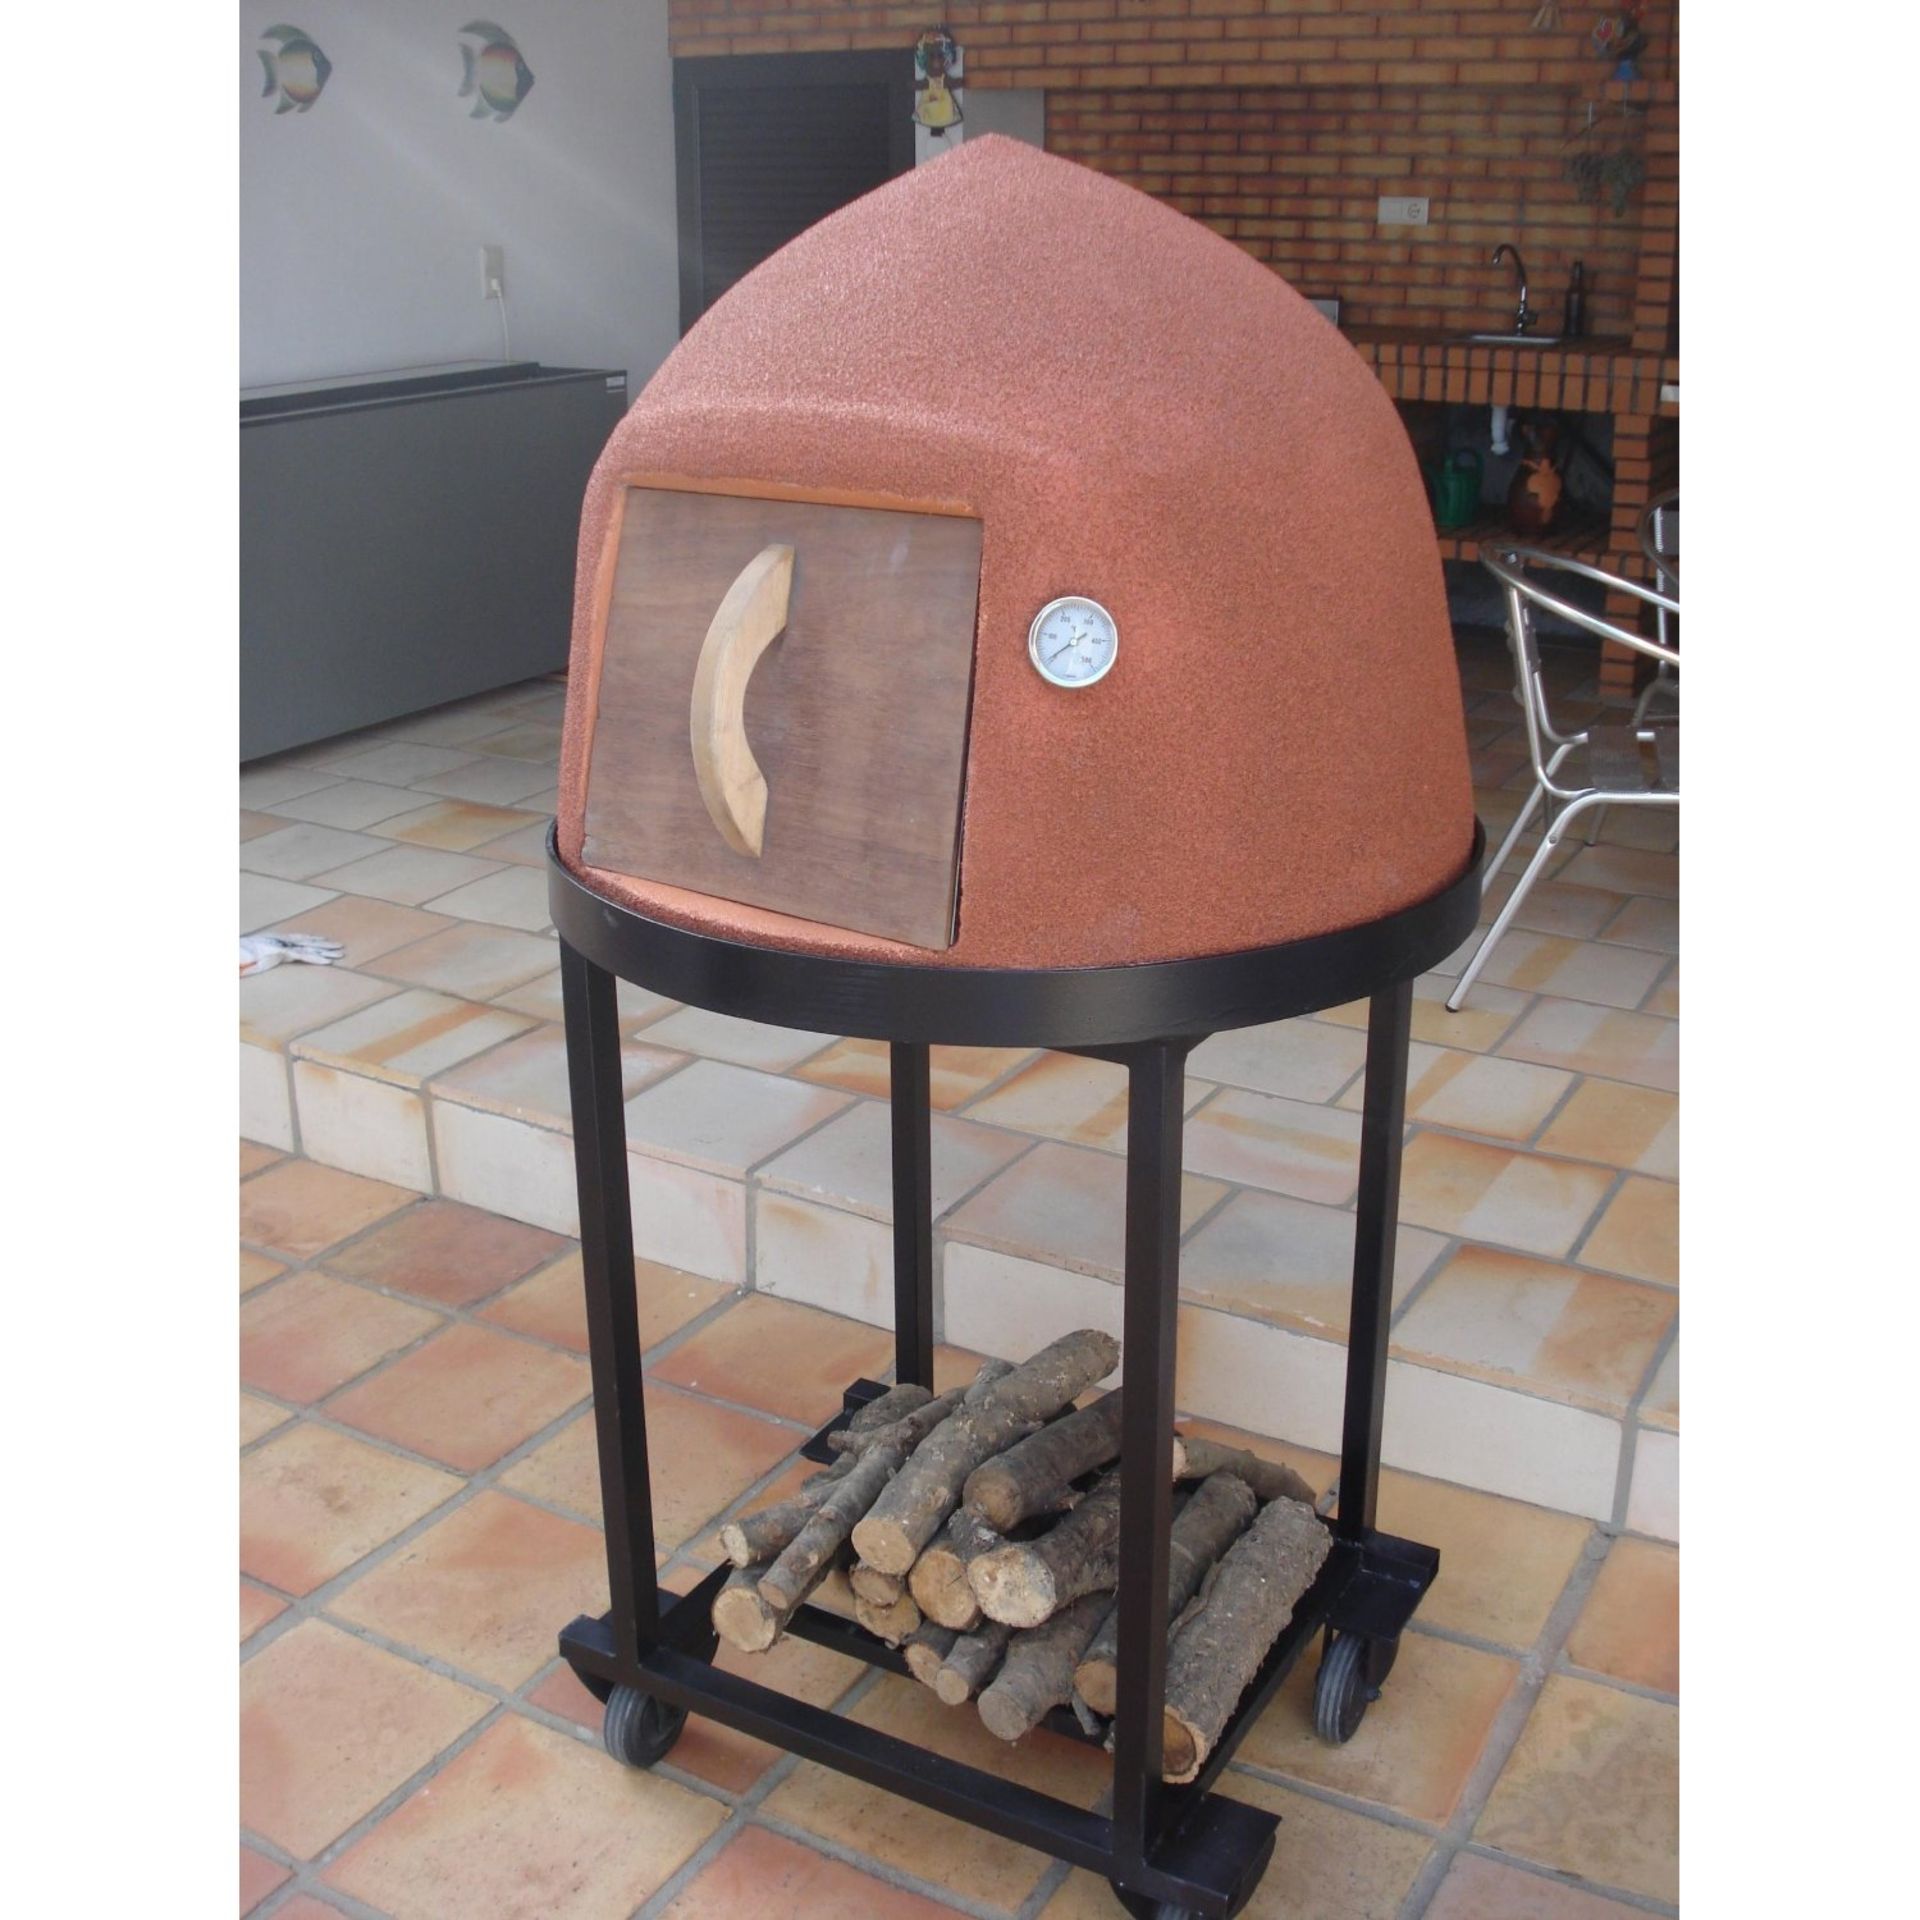 Beehive Wood Fired Pizza Oven, Insulated Construction, 27.5" Interior diameter, 35" Exterior - Image 2 of 7